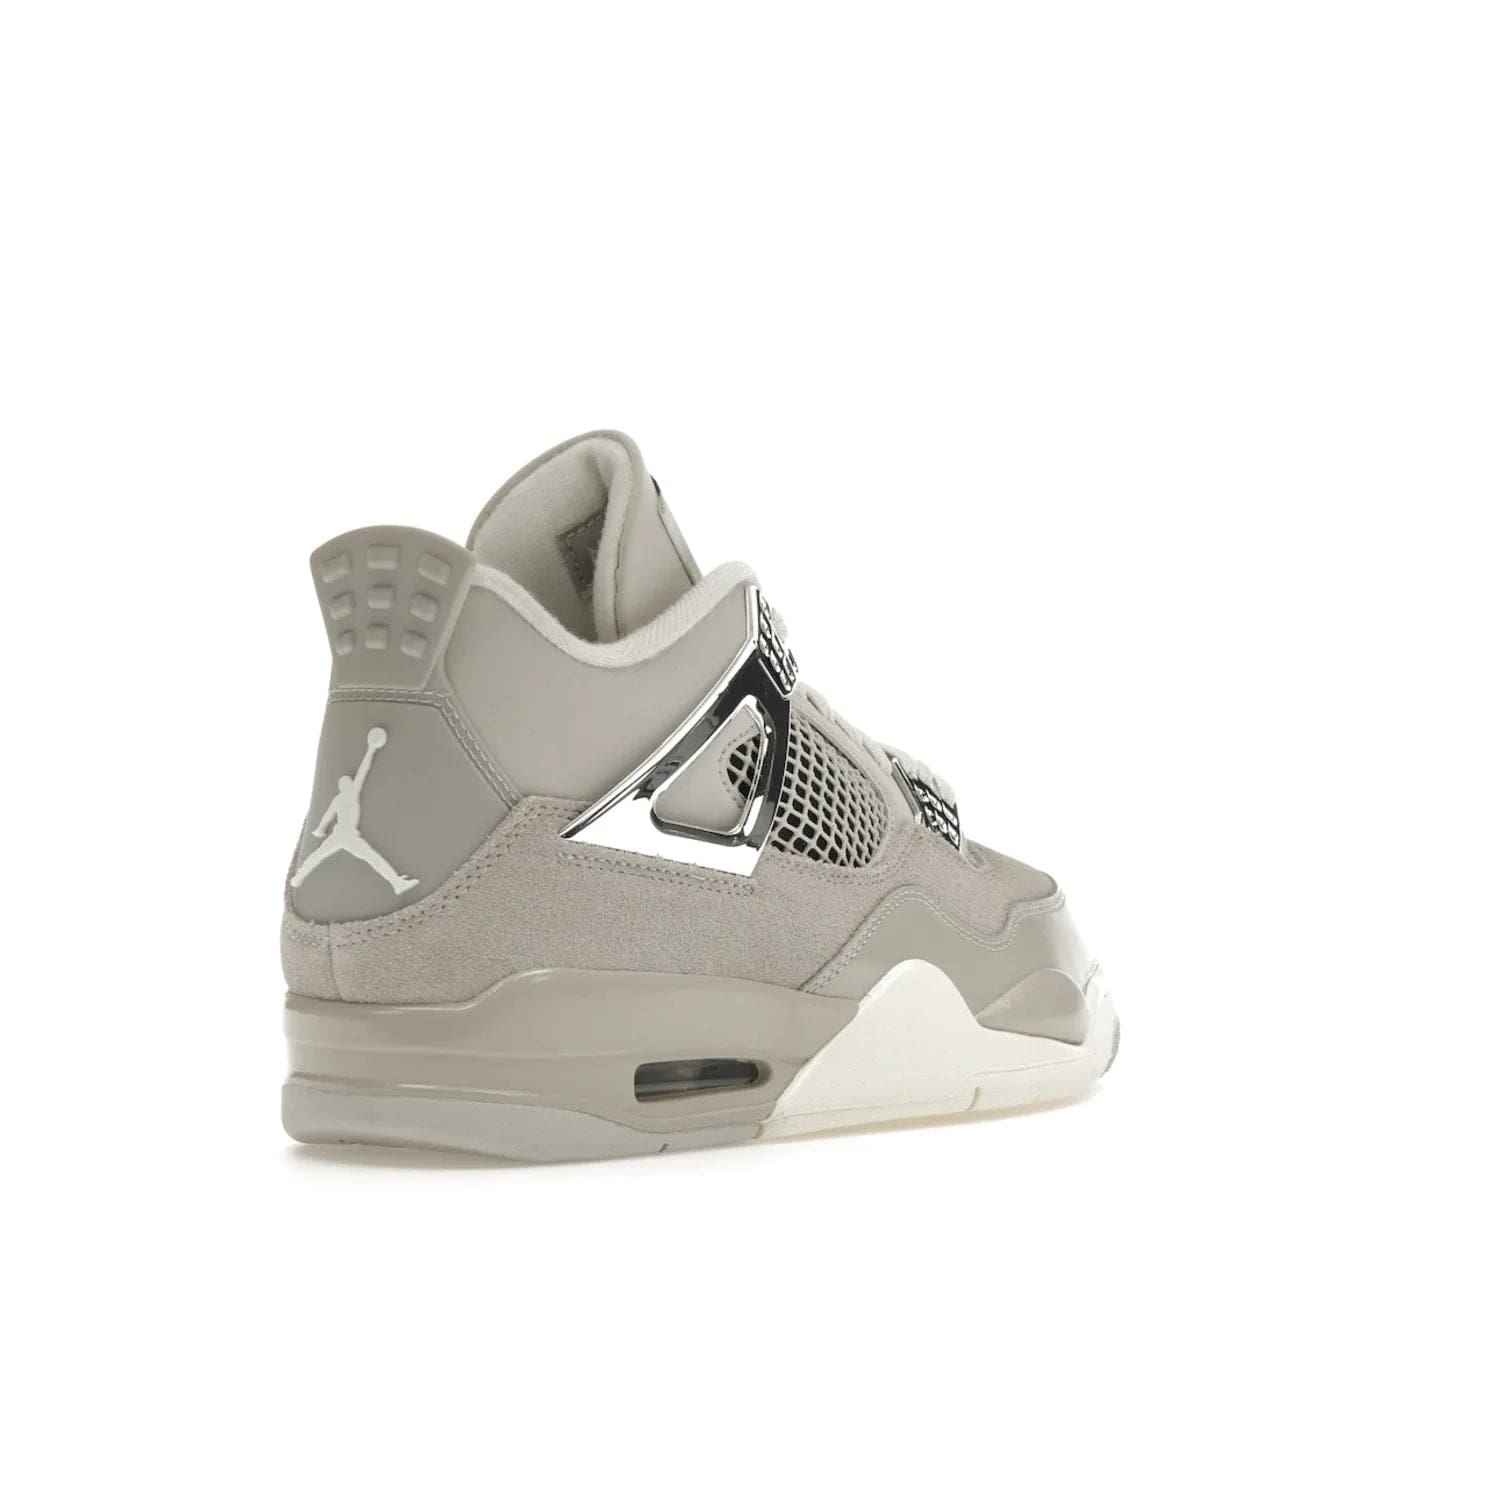 Jordan 4 Retro Frozen Moments (Women's) - Image 32 - Only at www.BallersClubKickz.com - The Jordan 4 Retro Frozen Moments is a stylish blend of classic design elements and modern tones. Featuring suede and leather overlays in a light iron-ore, sail, neutral grey, black, and metallic silver colorway. Get this iconic high-performance sneaker for $210.